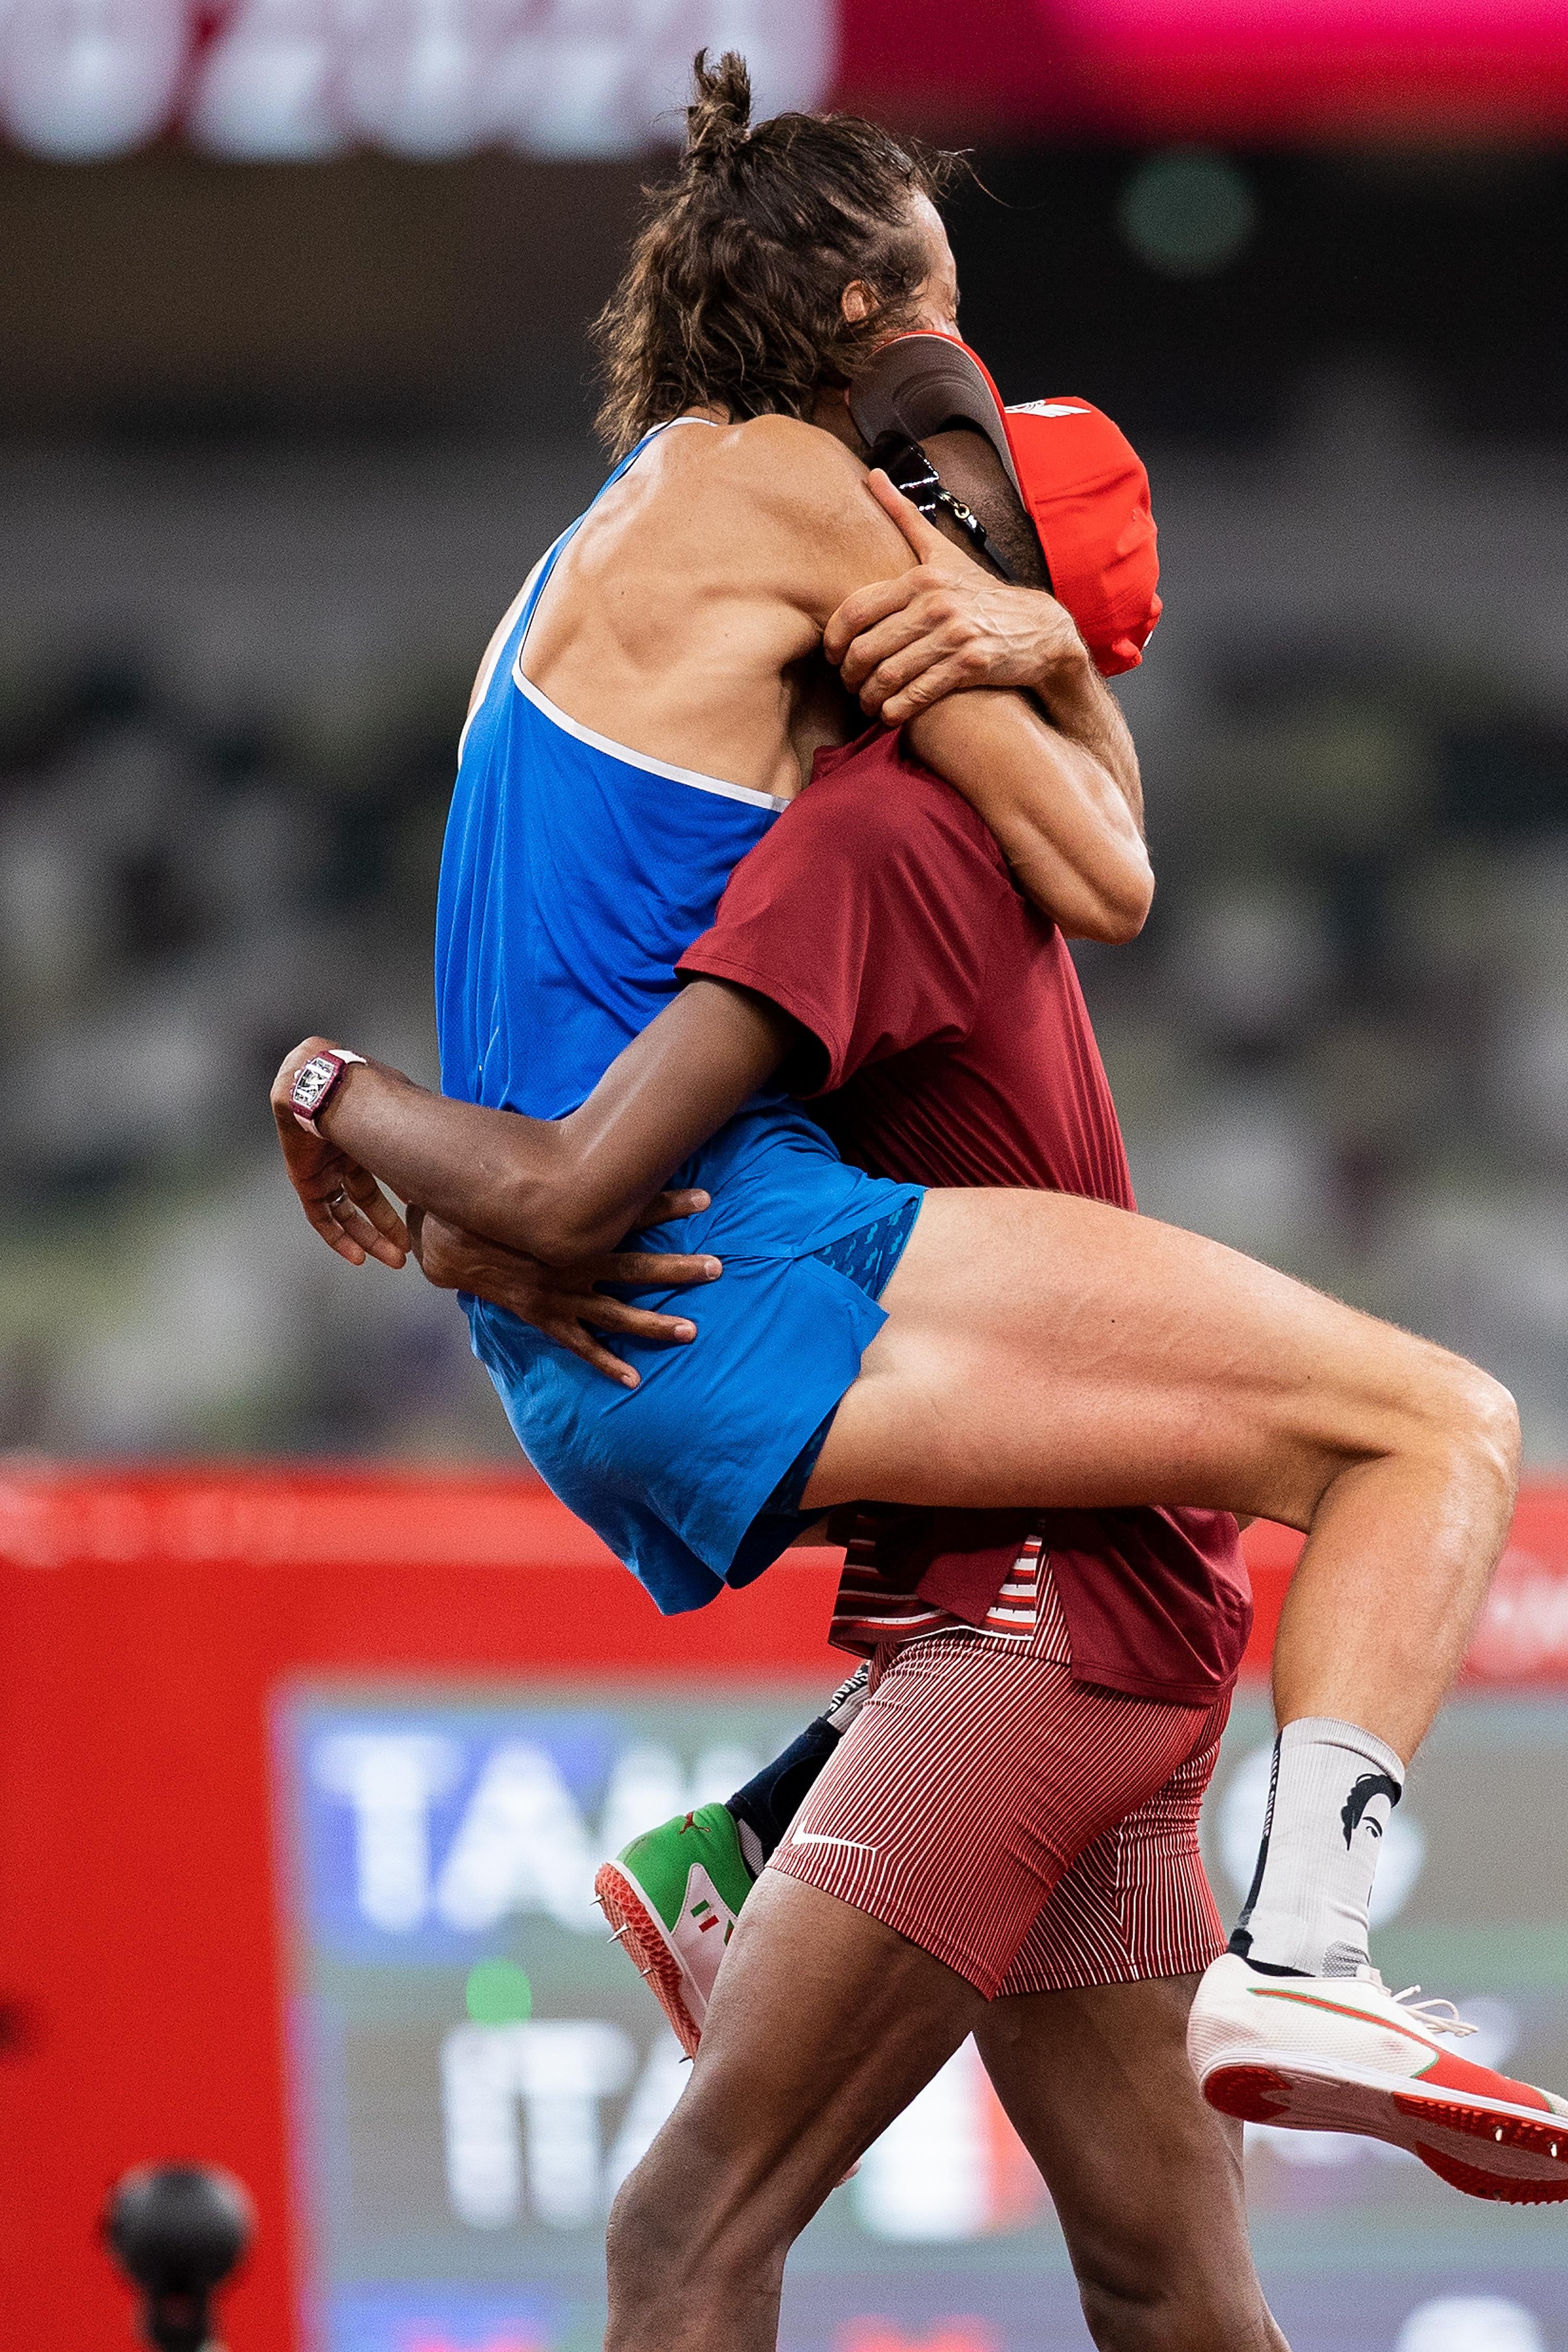 A high jumper wearing a blue uniform leaps into the arms of a high jumper wearing a red uniform. They embrace.